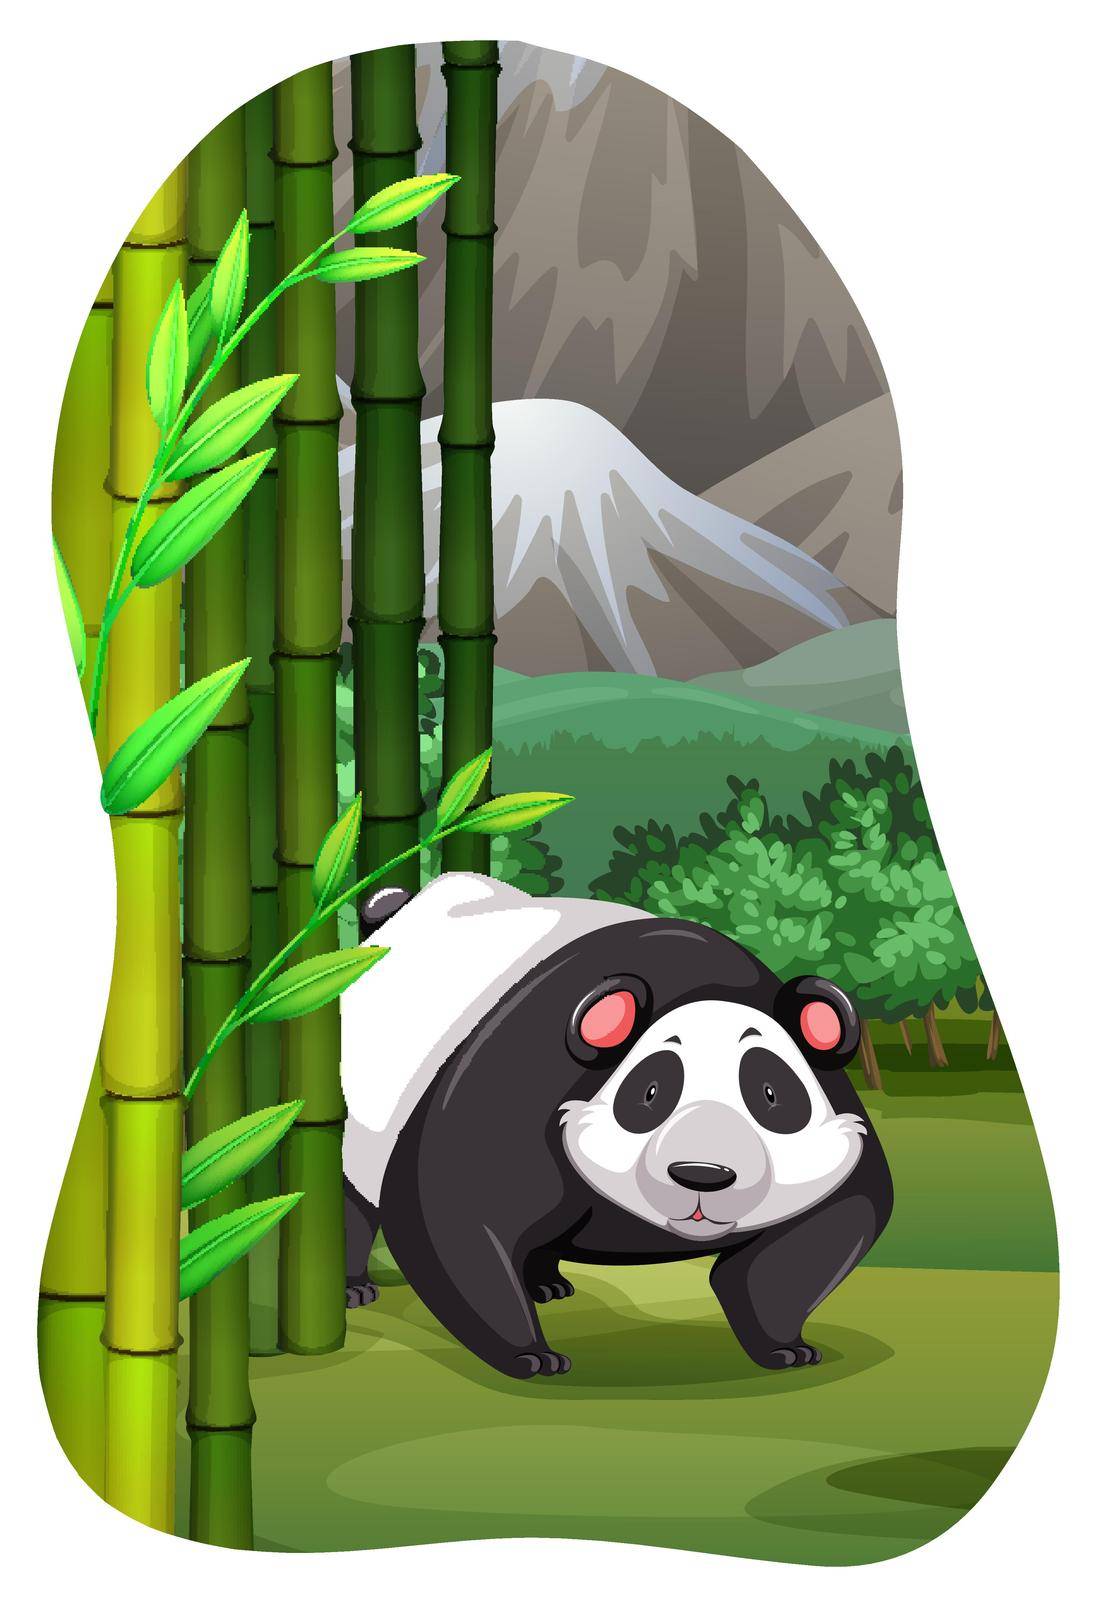 Panda living in the bamboo forest